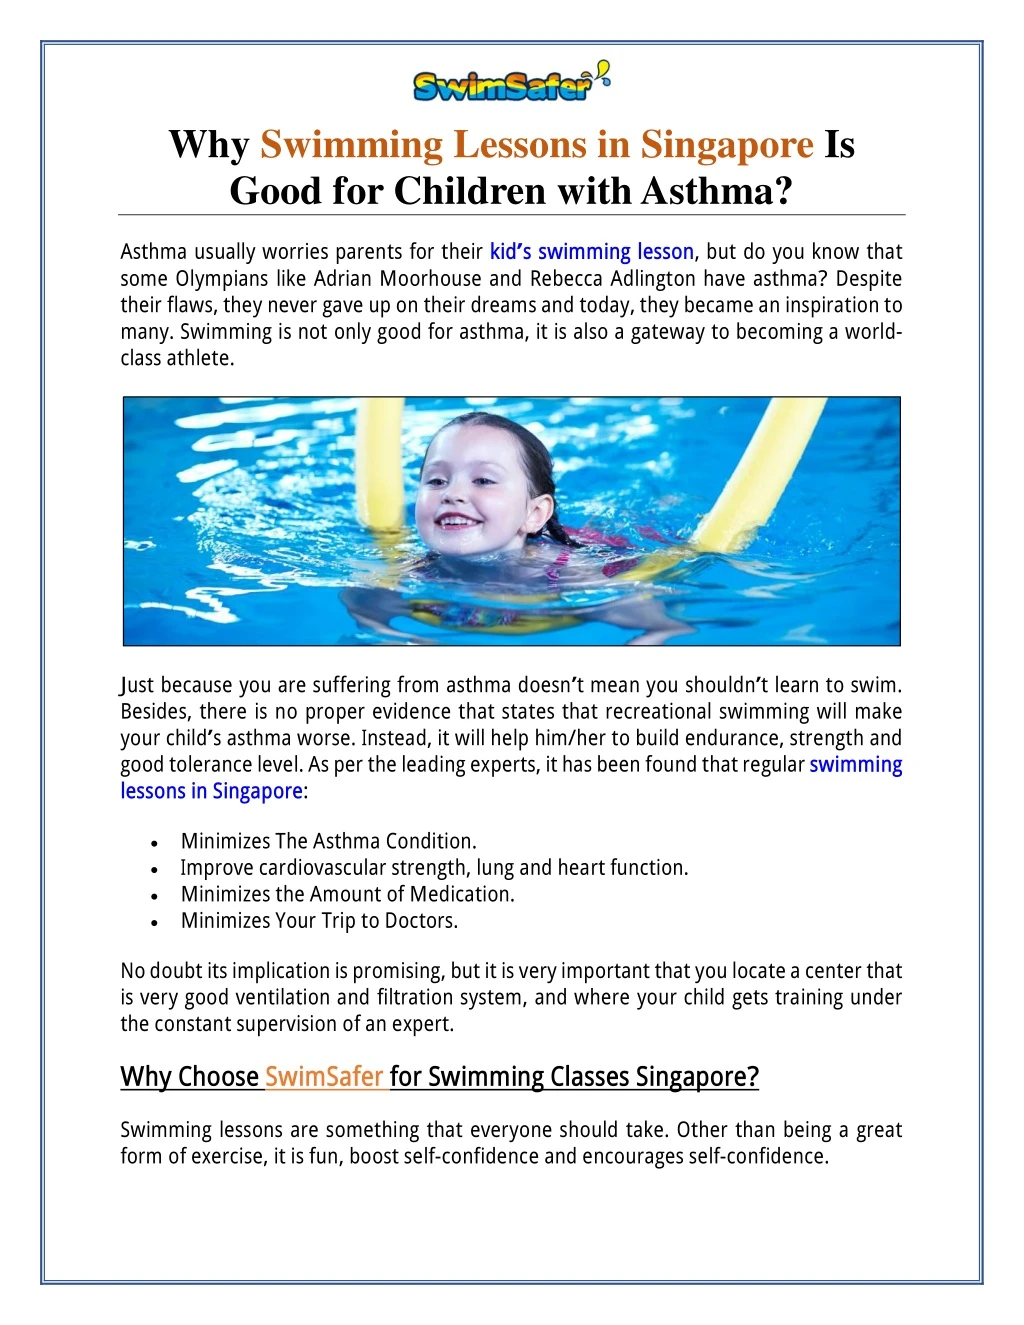 why swimming lessons in singapore is good